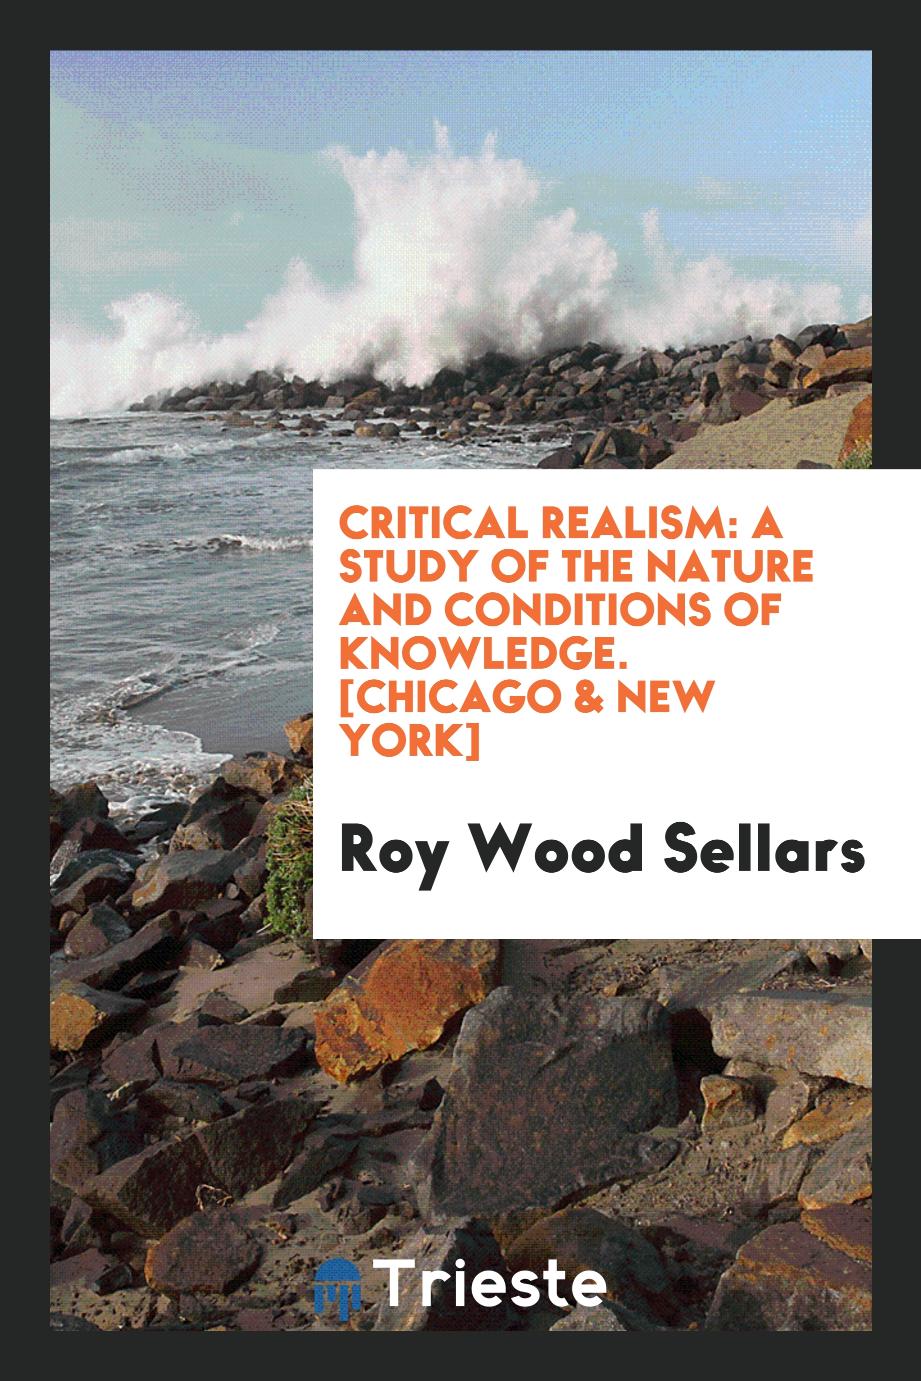 Critical Realism: A Study of the Nature and Conditions of Knowledge. [Chicago & New York]